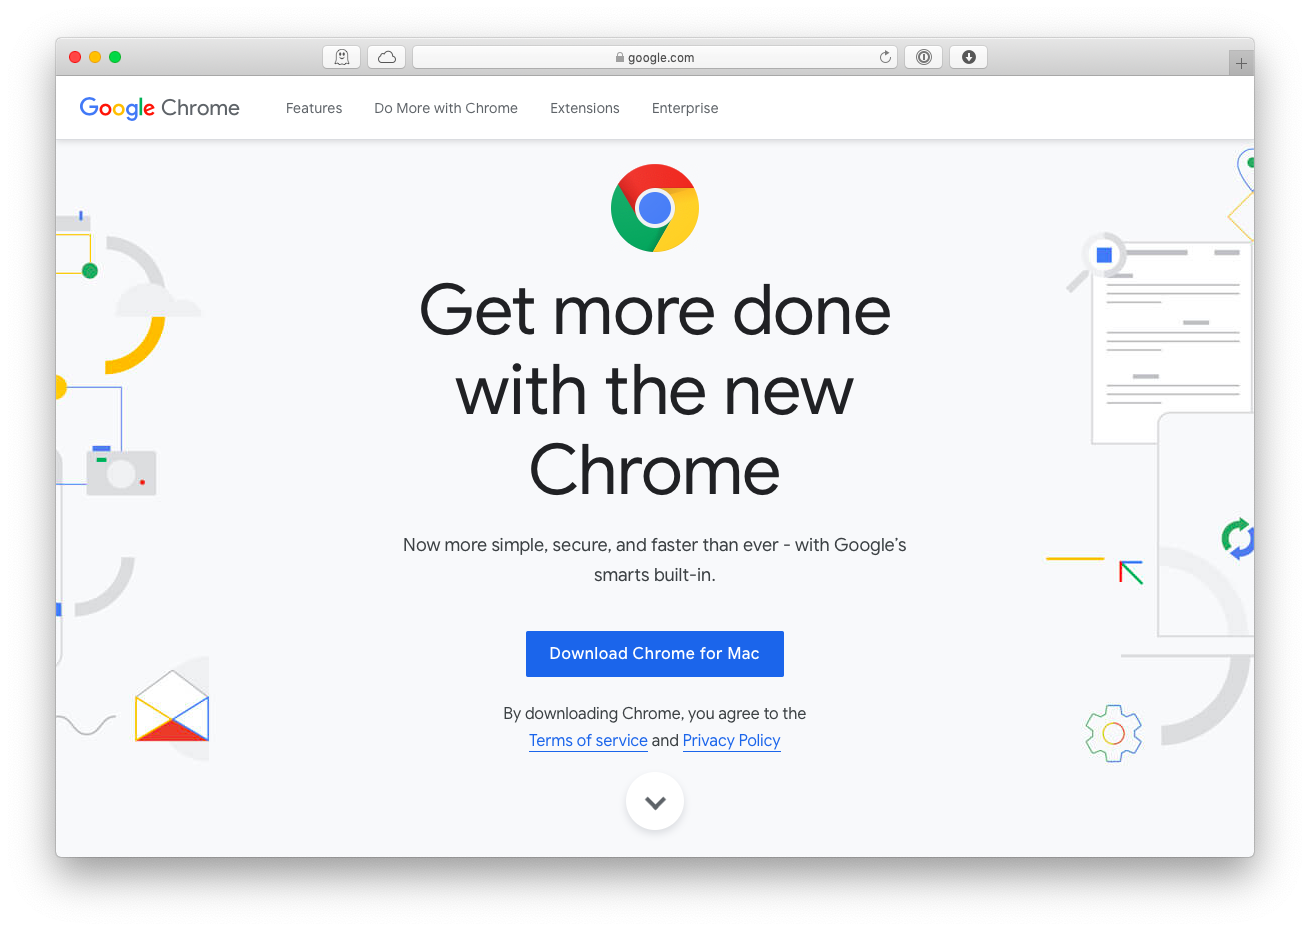 Can i install google chrome on my macbook pro 13.3